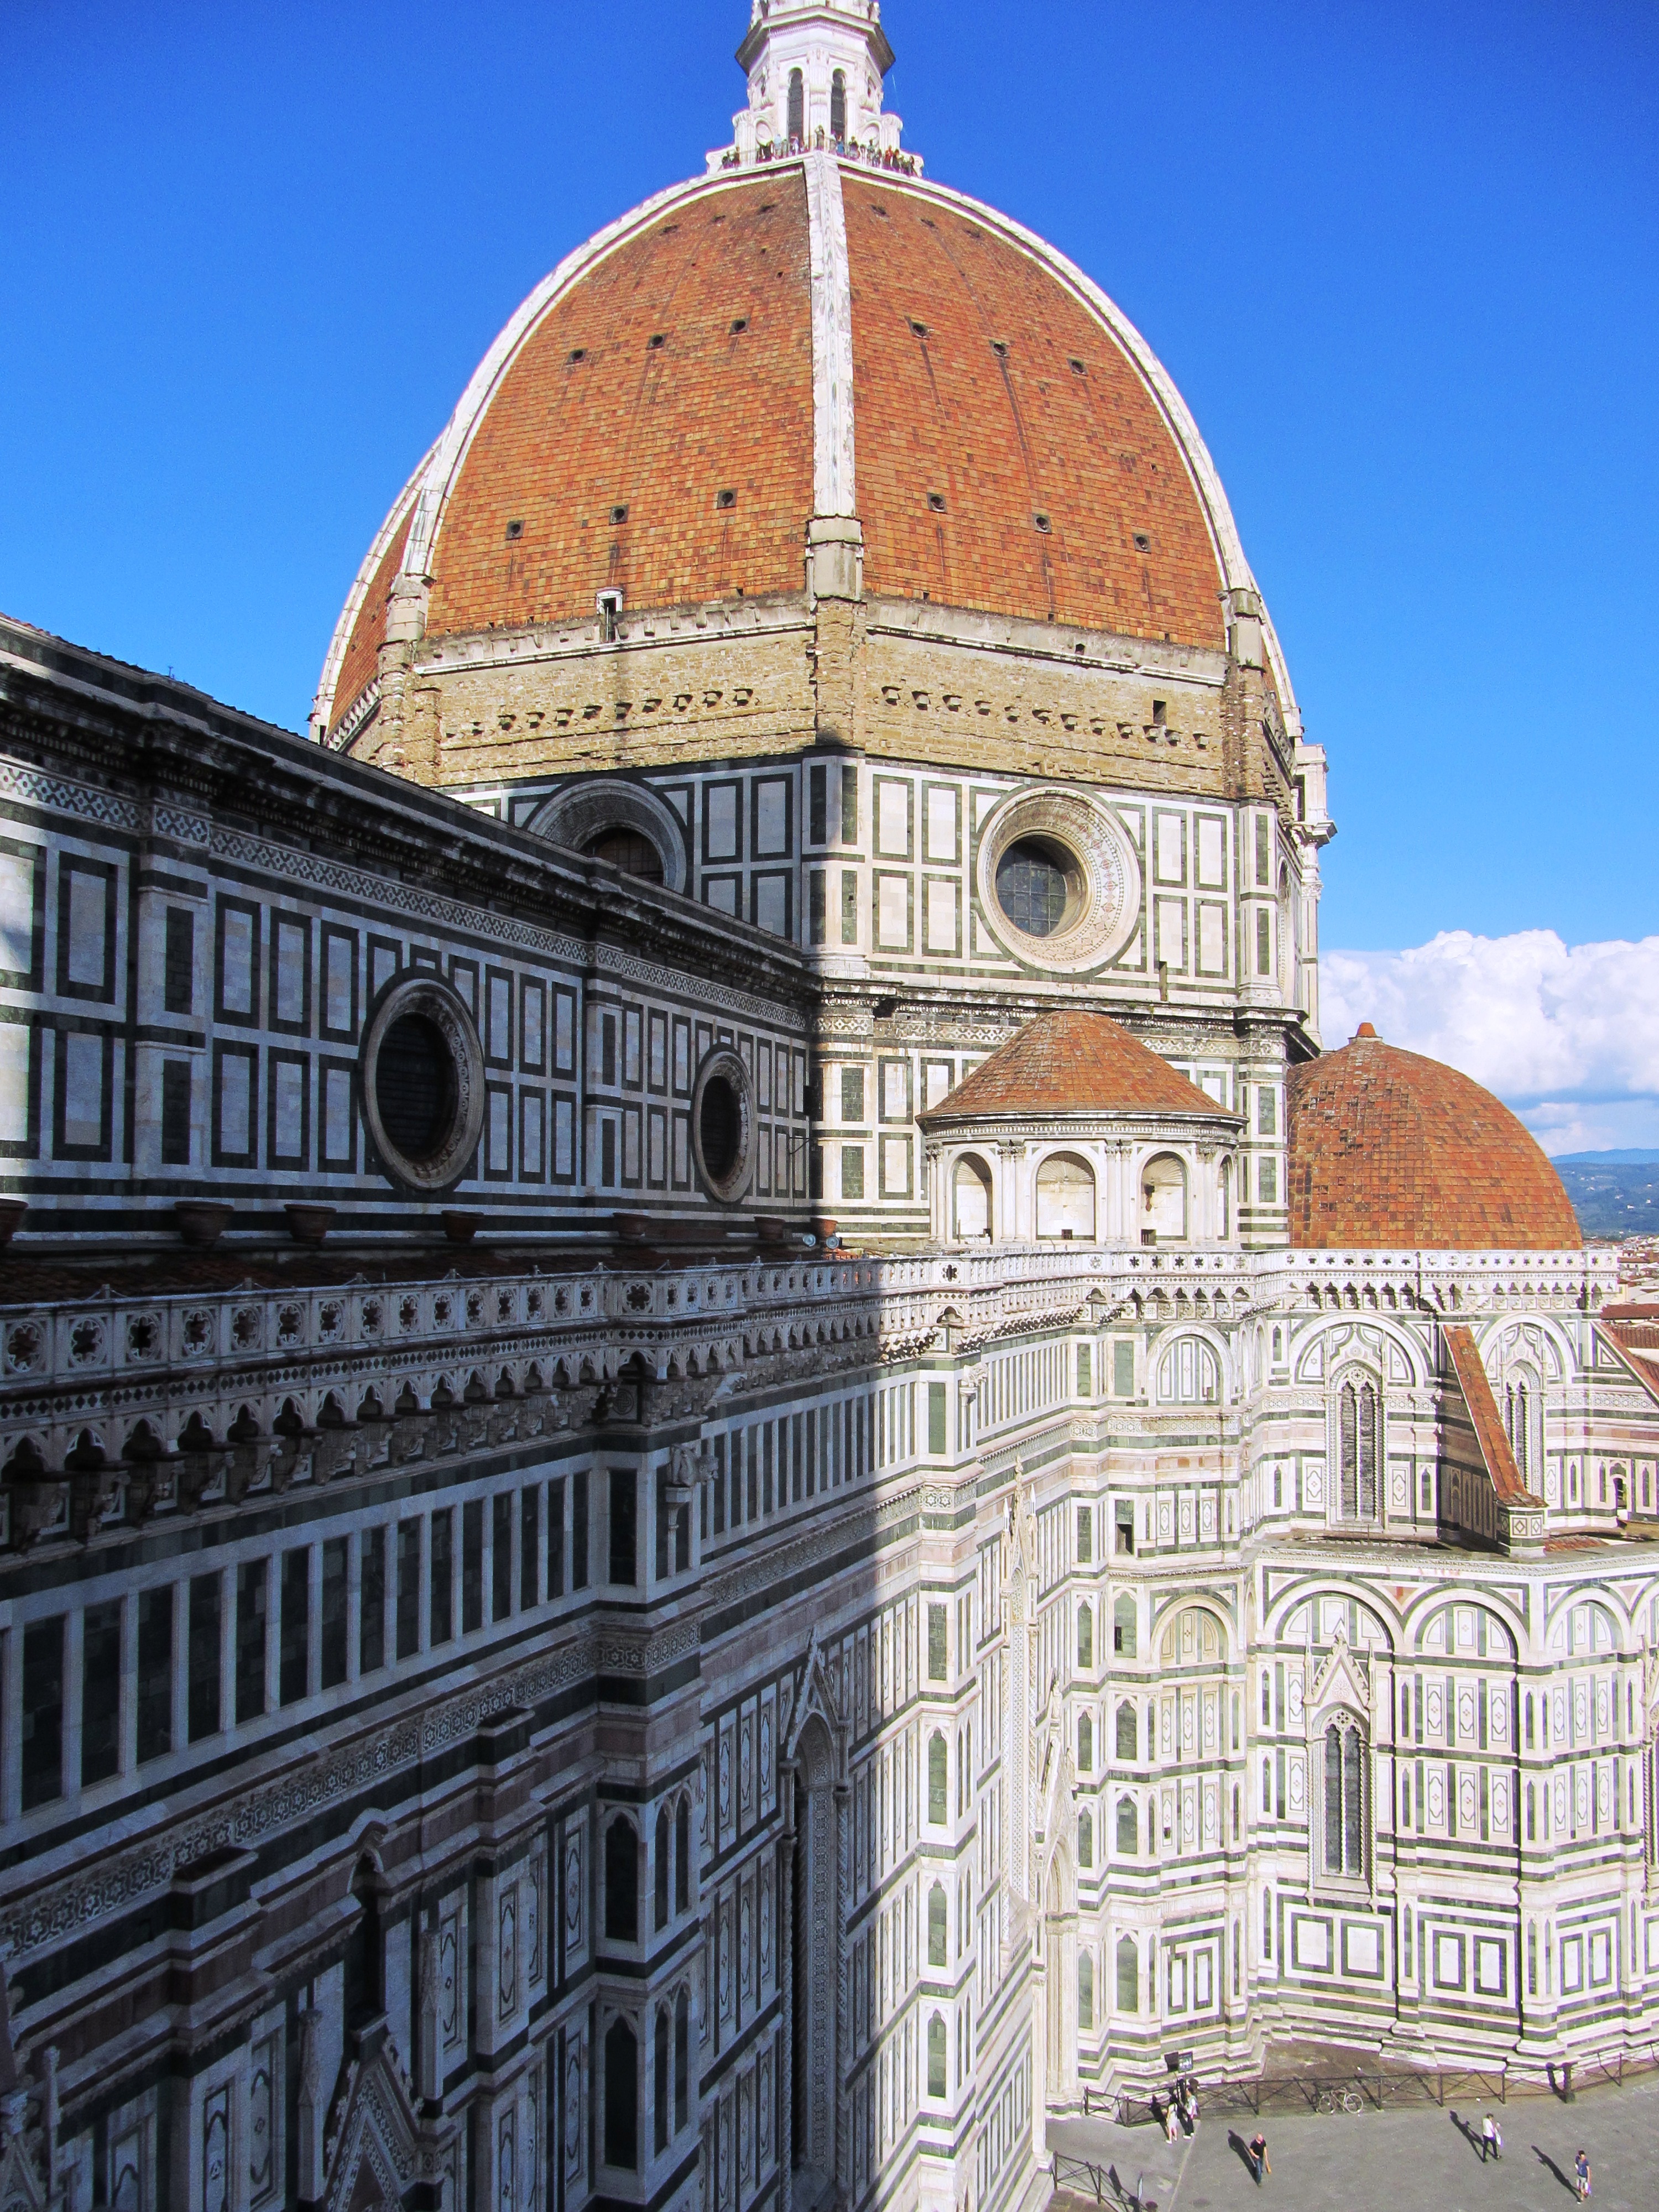 Dome of Florence